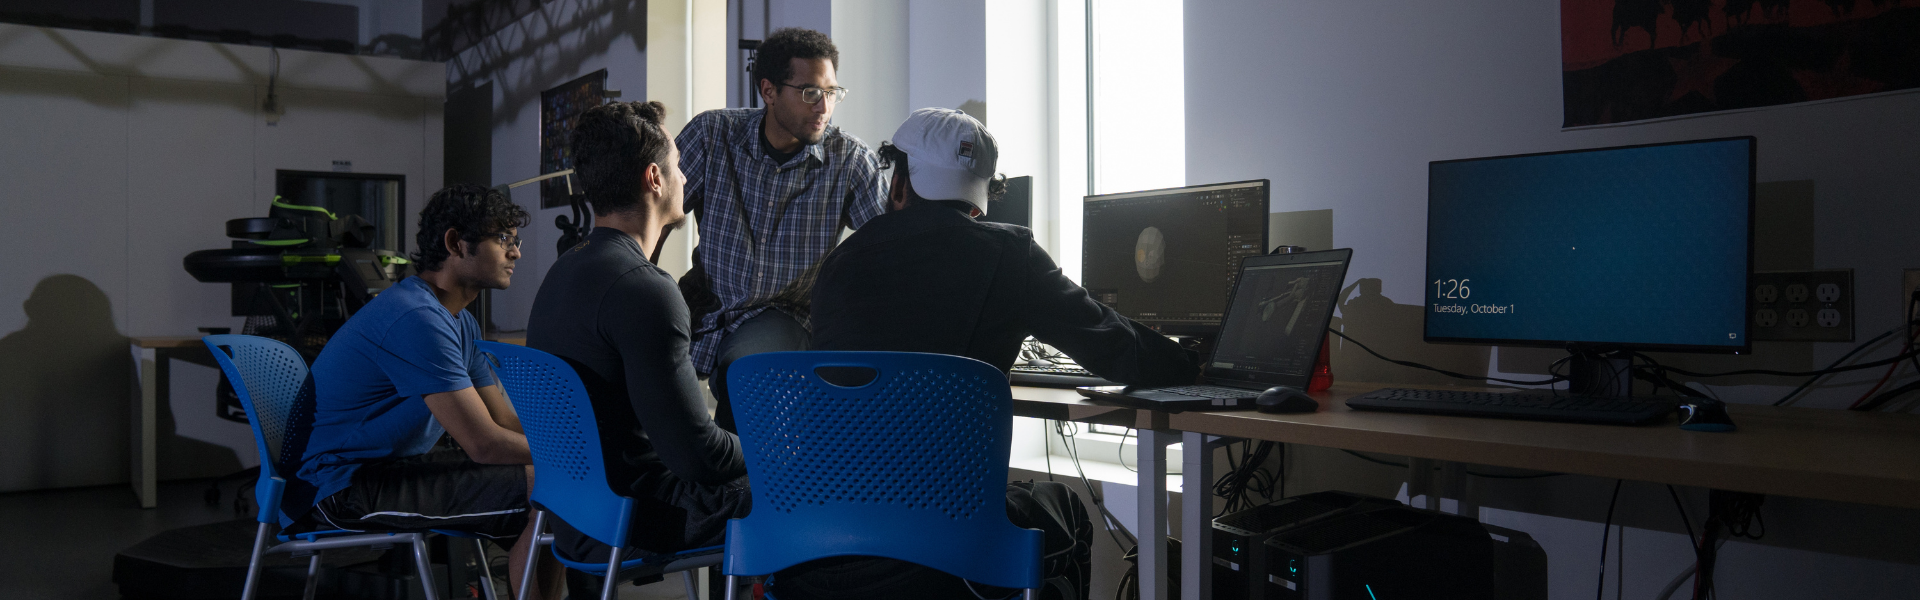 Students working at a computer on campus